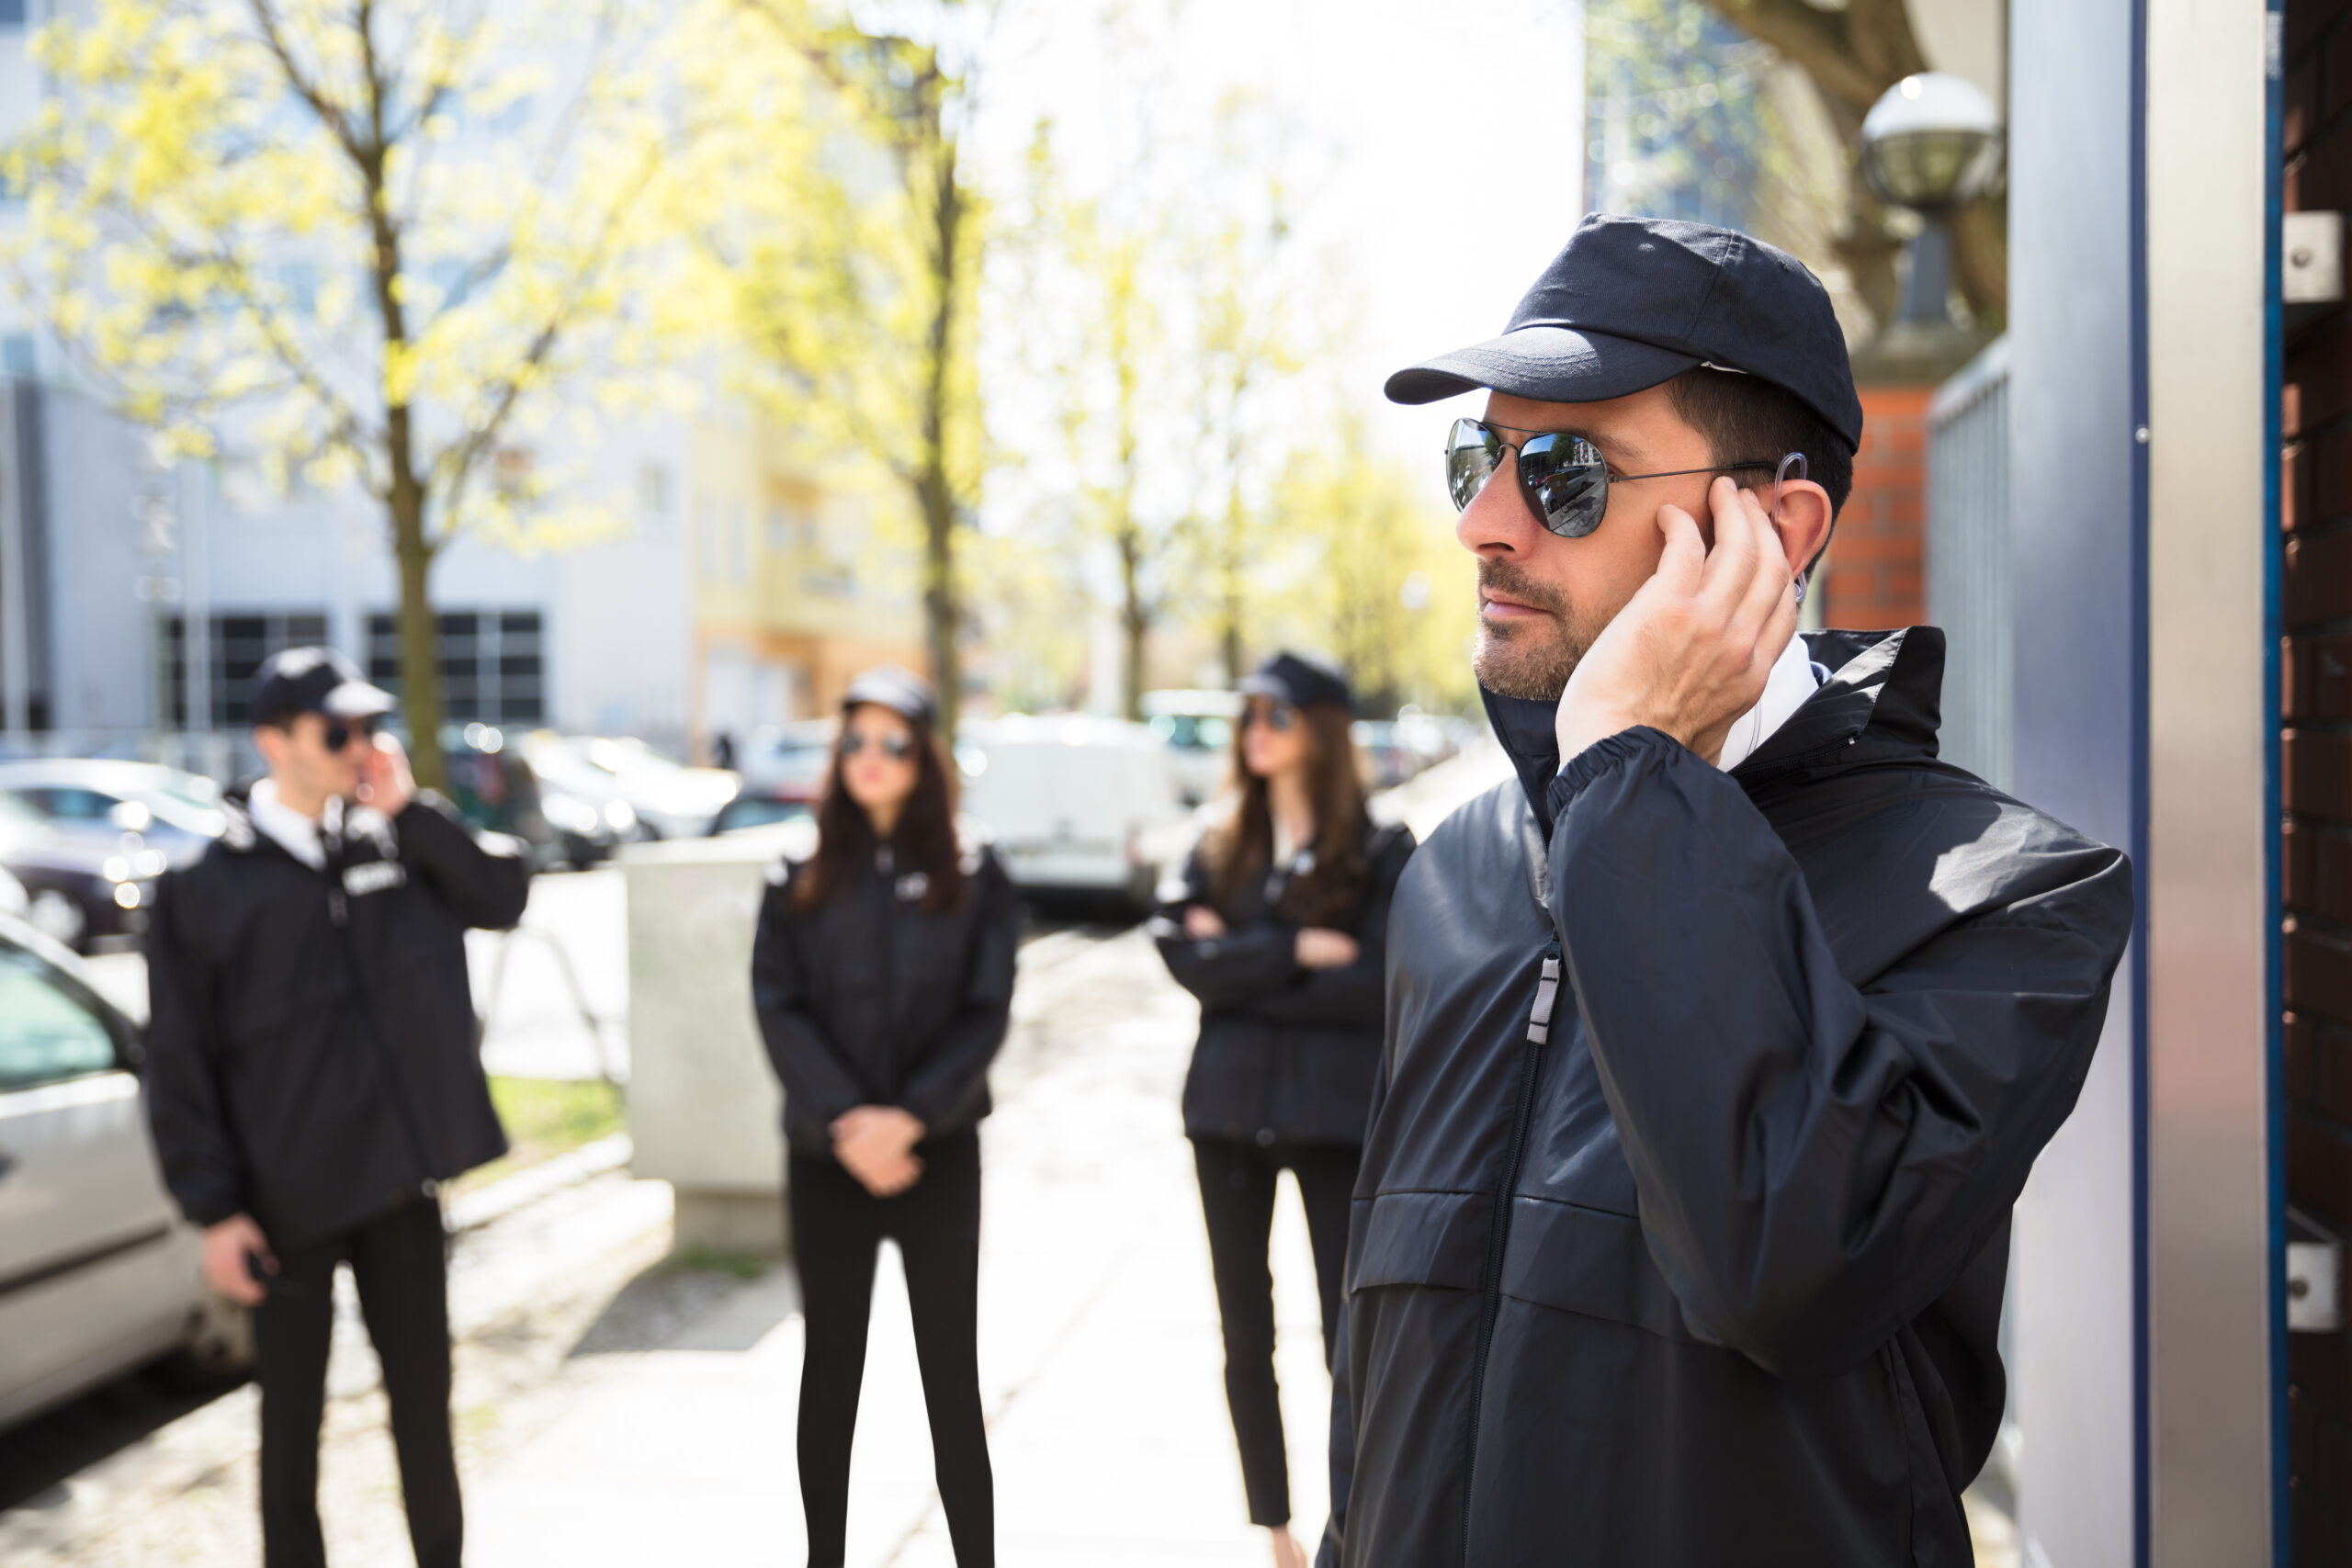 Security Guard Services in Houston TX